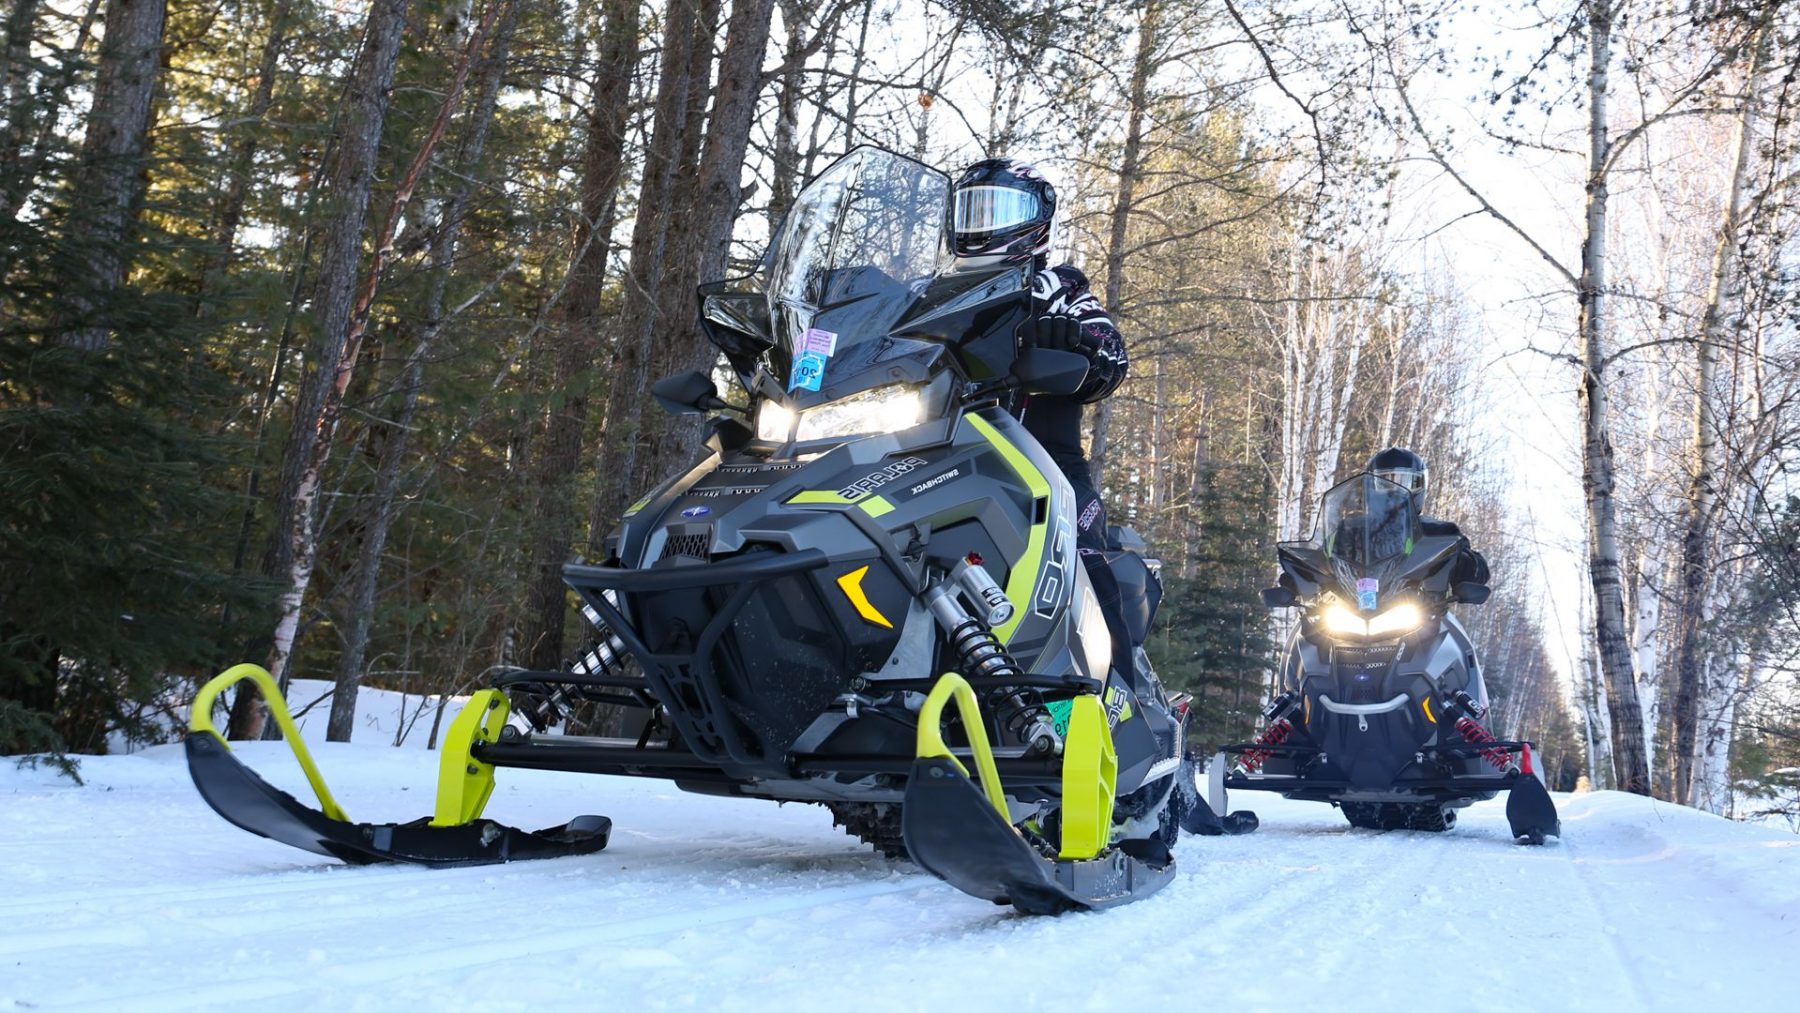 Article: Oneida County snowmobile guide